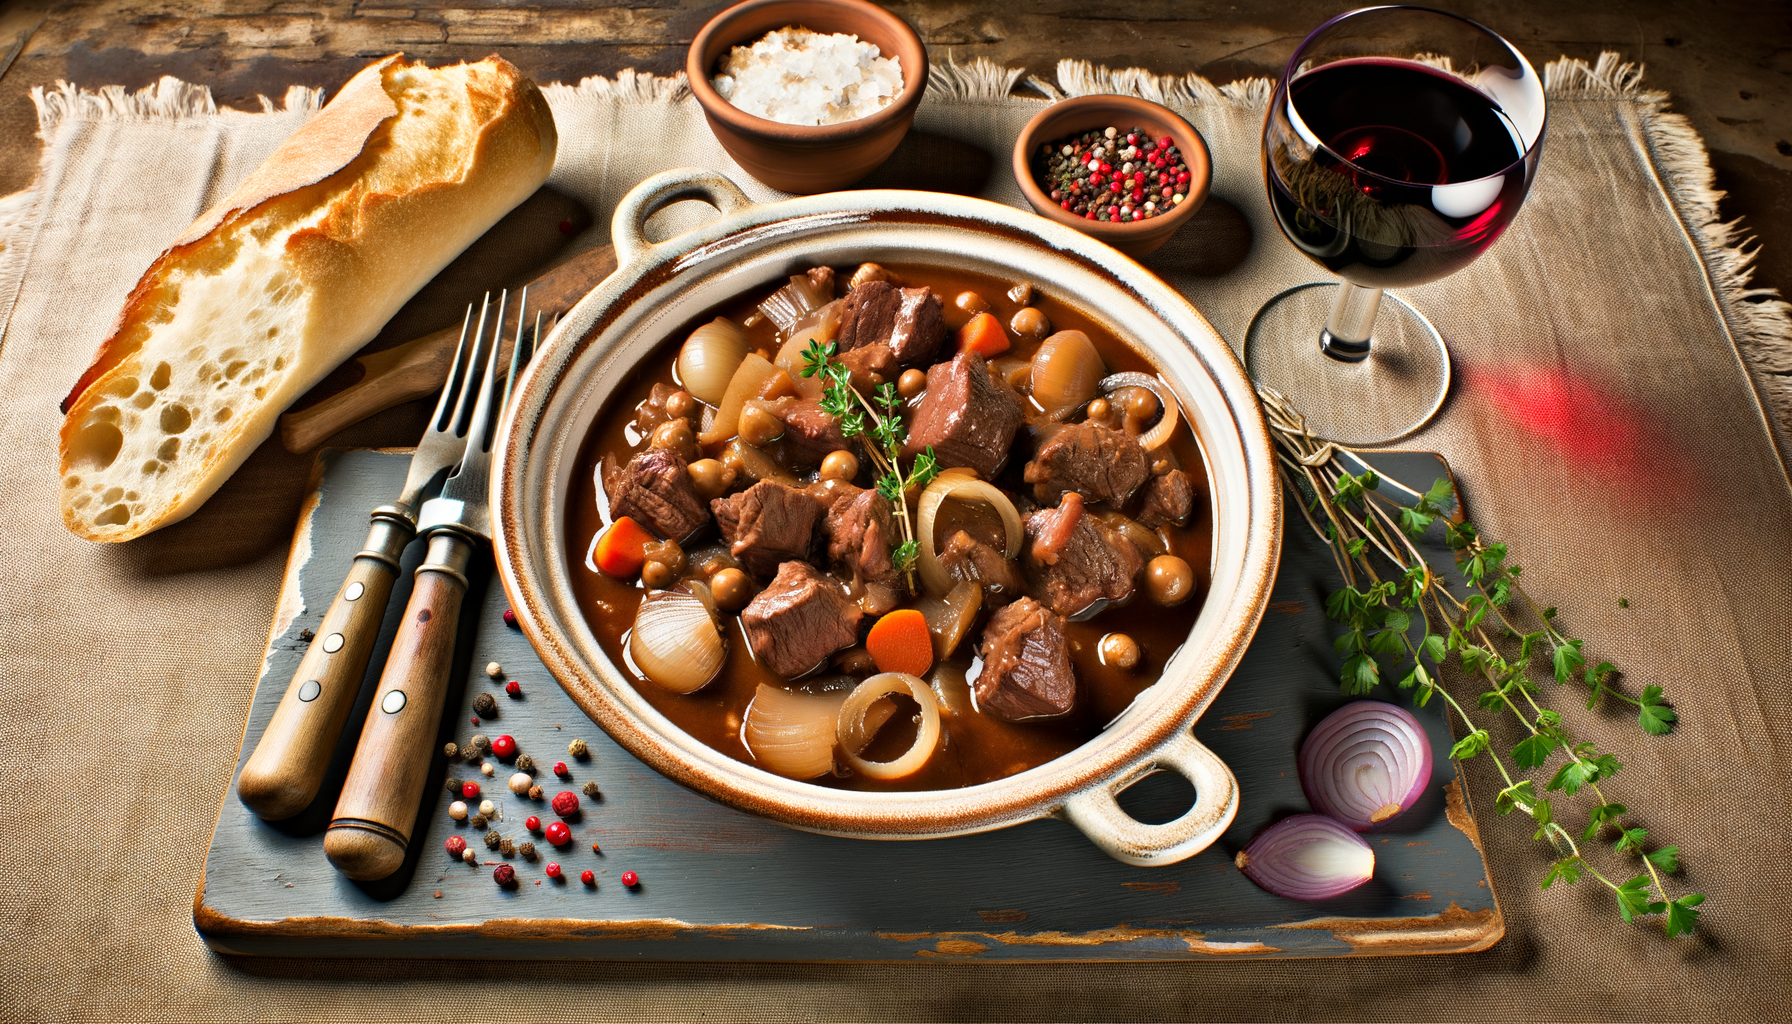 Tender beef bourguignon in a rich wine sauce with carrots, onions, and mushrooms, served beside red wine and a baguette on a rustic table